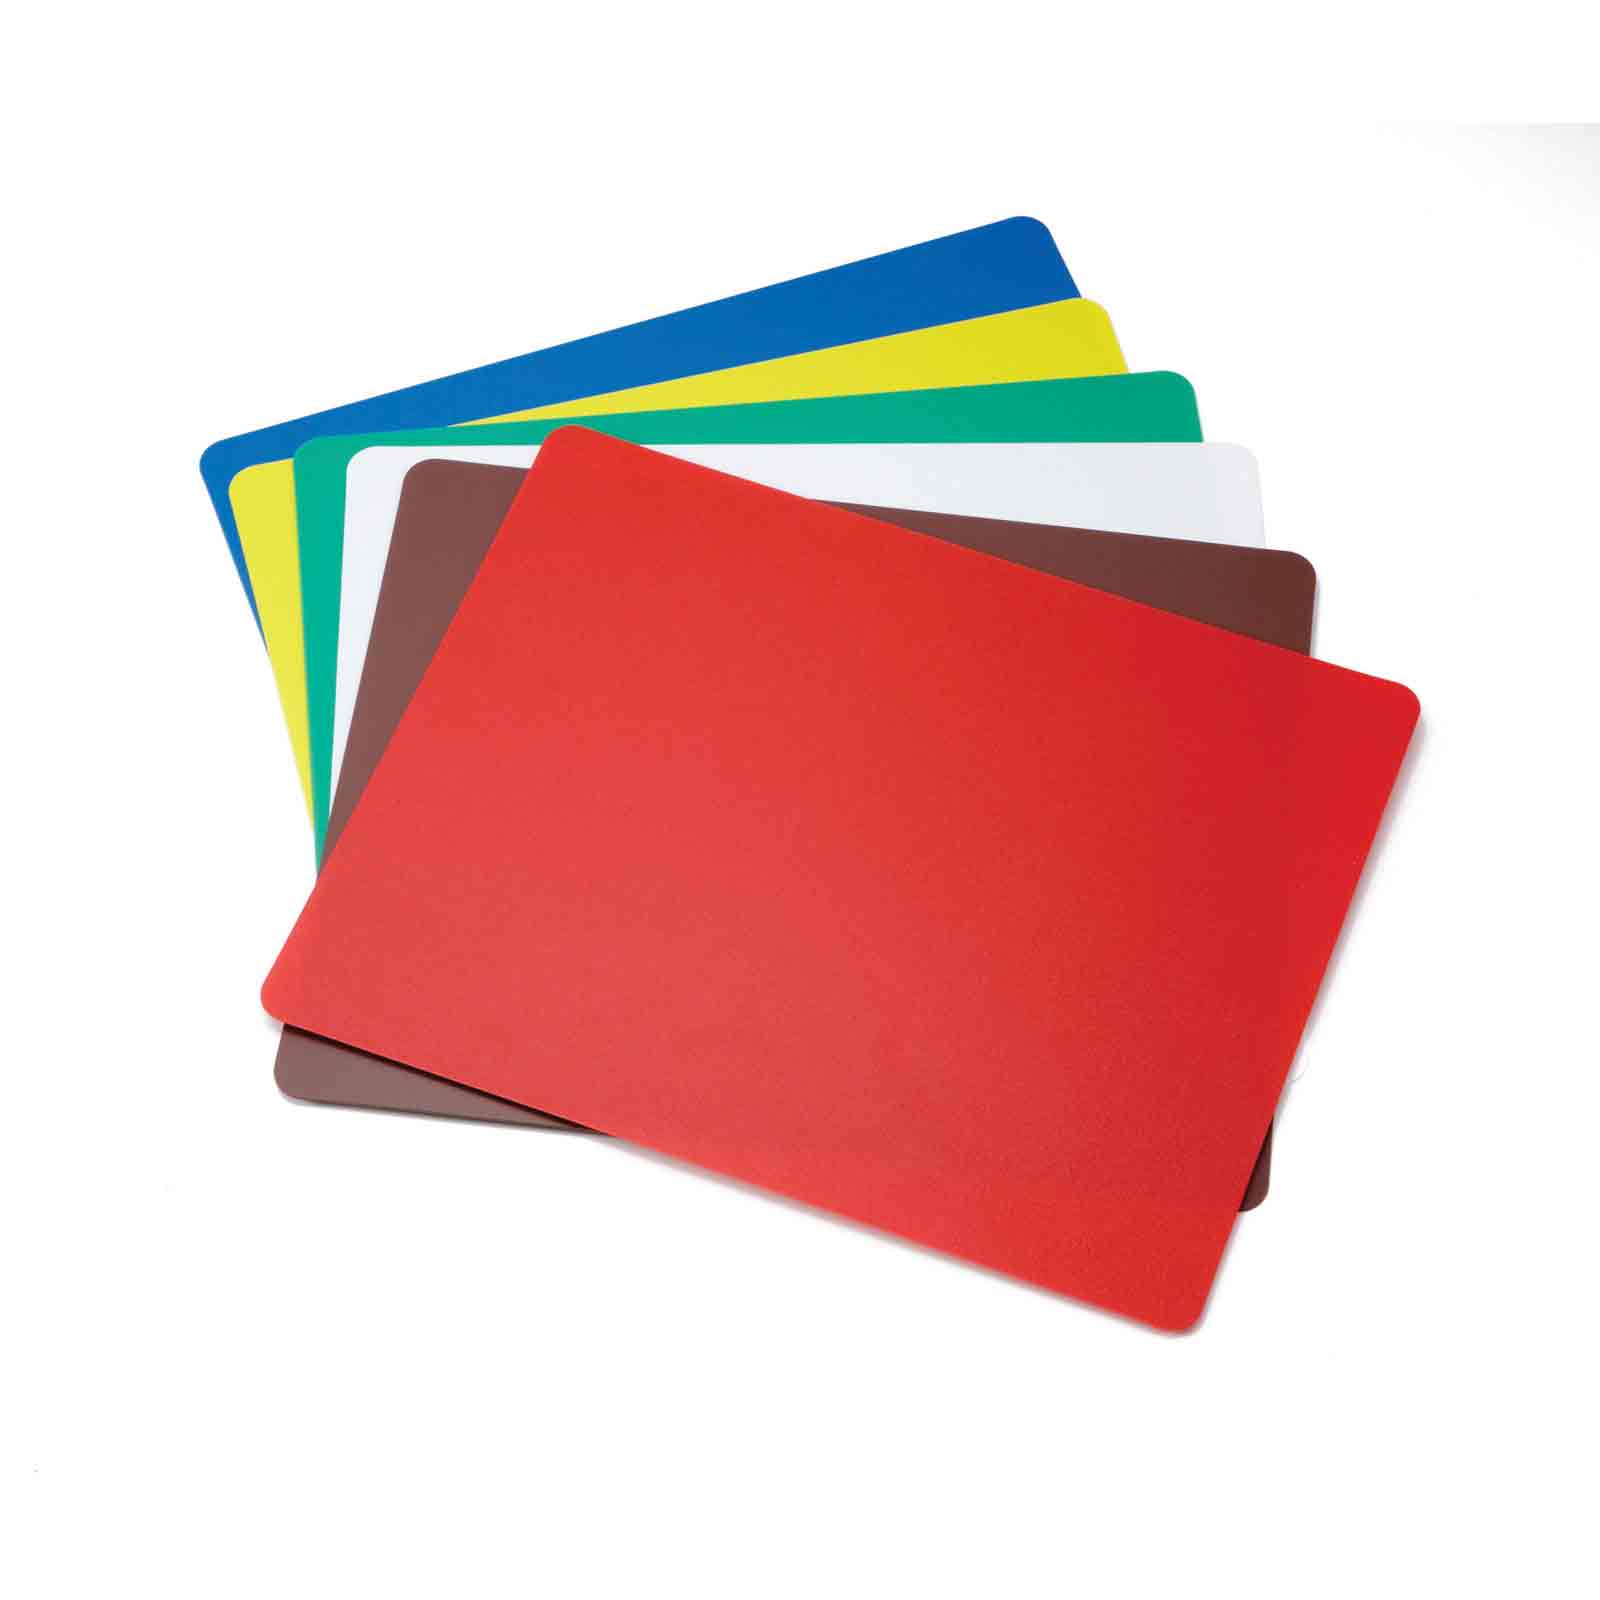 12 x 18 Flexible Cutting Boards, Pack of 6